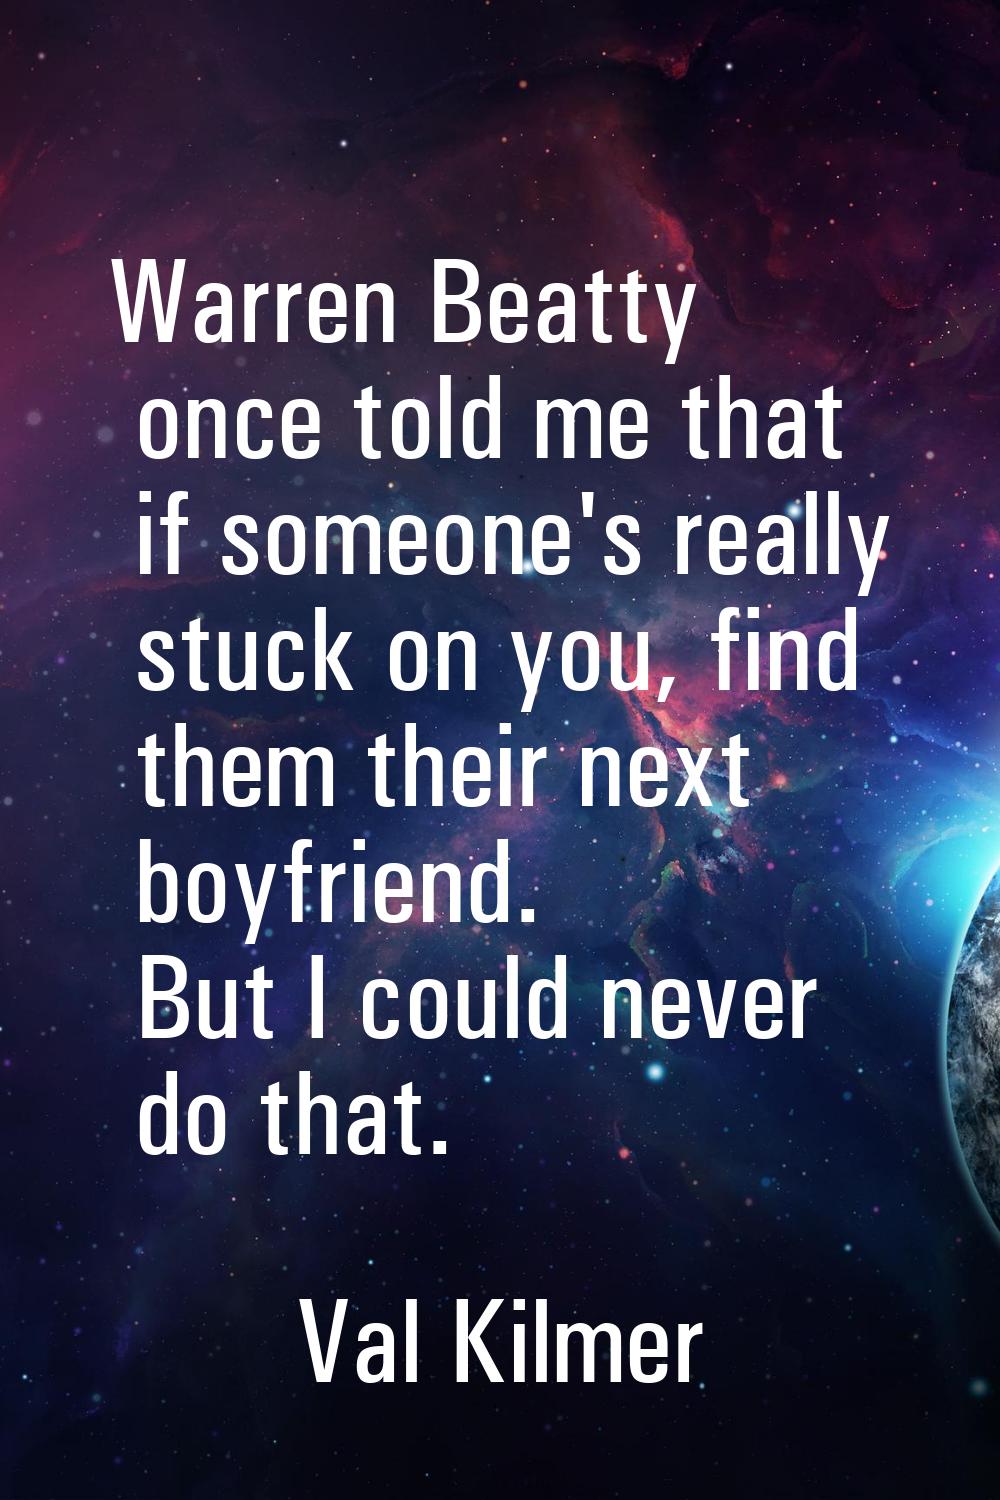 Warren Beatty once told me that if someone's really stuck on you, find them their next boyfriend. B